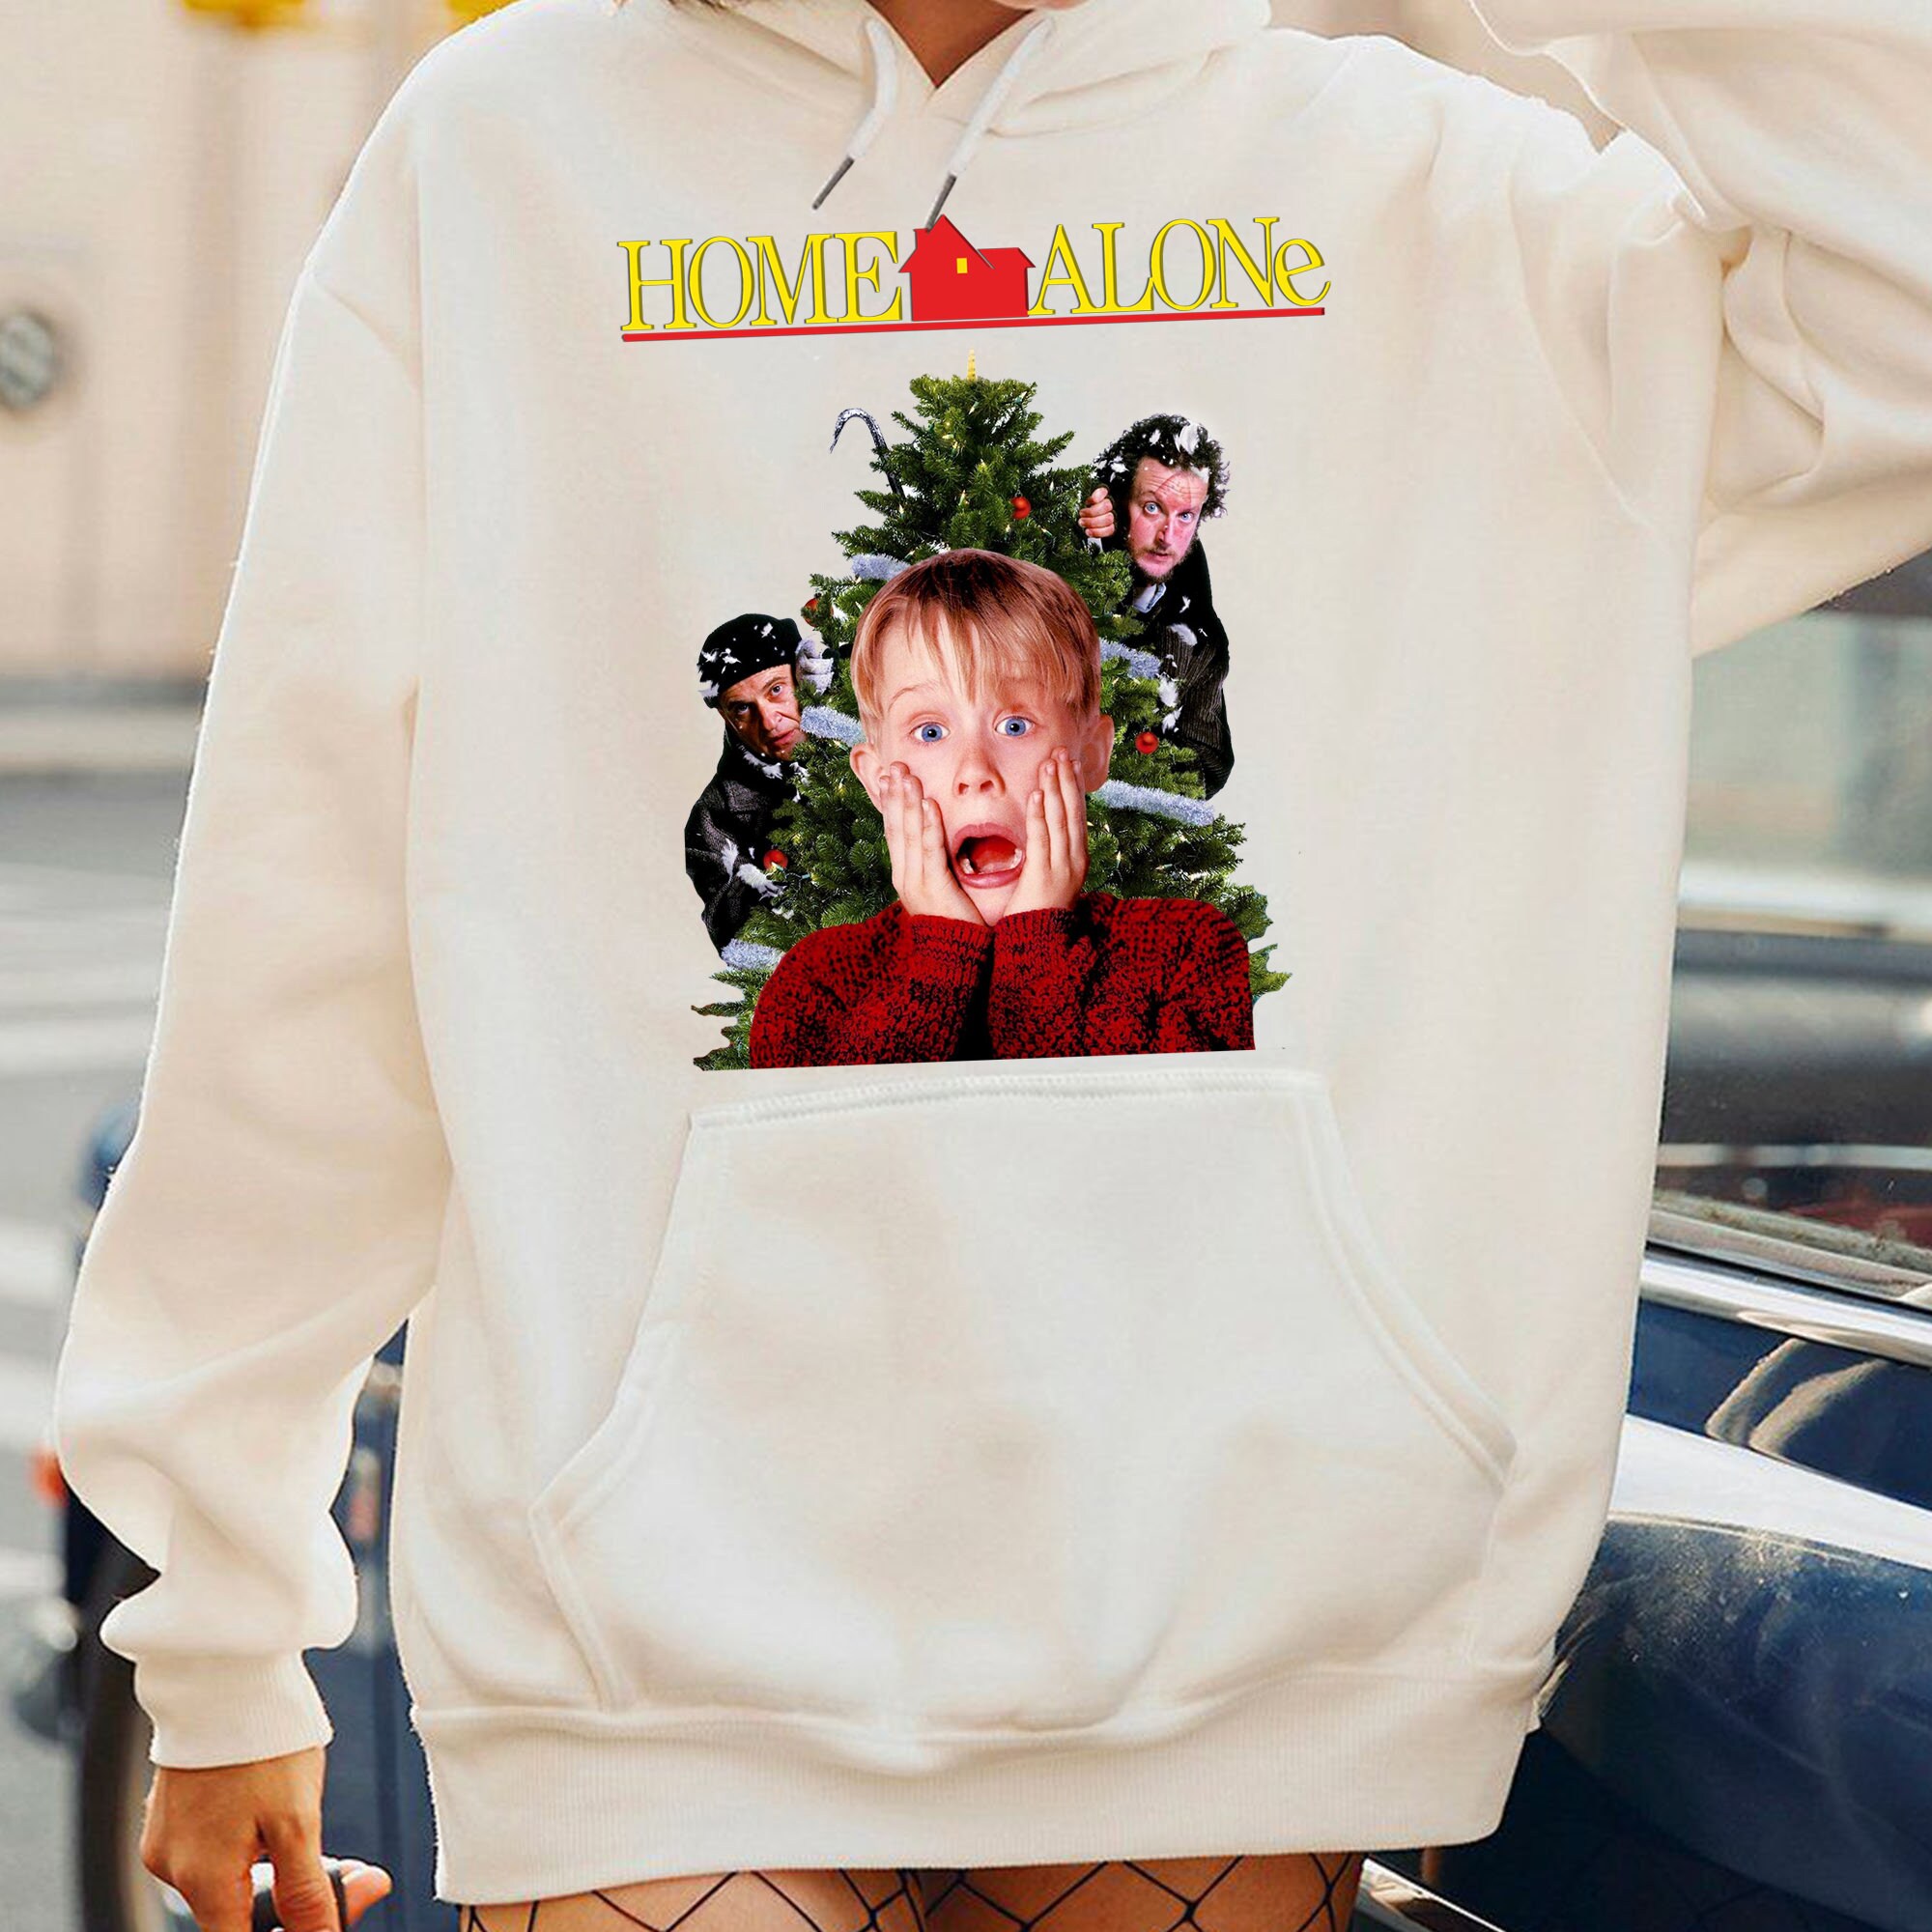 Discover Home Alone Kevin Shirt, Kevin Screaming, Wet Bandits, Merry Christmas, Ya Filthy Animal, Home Alone Sweatshirt, Christmas Movie Character Sweatshirts